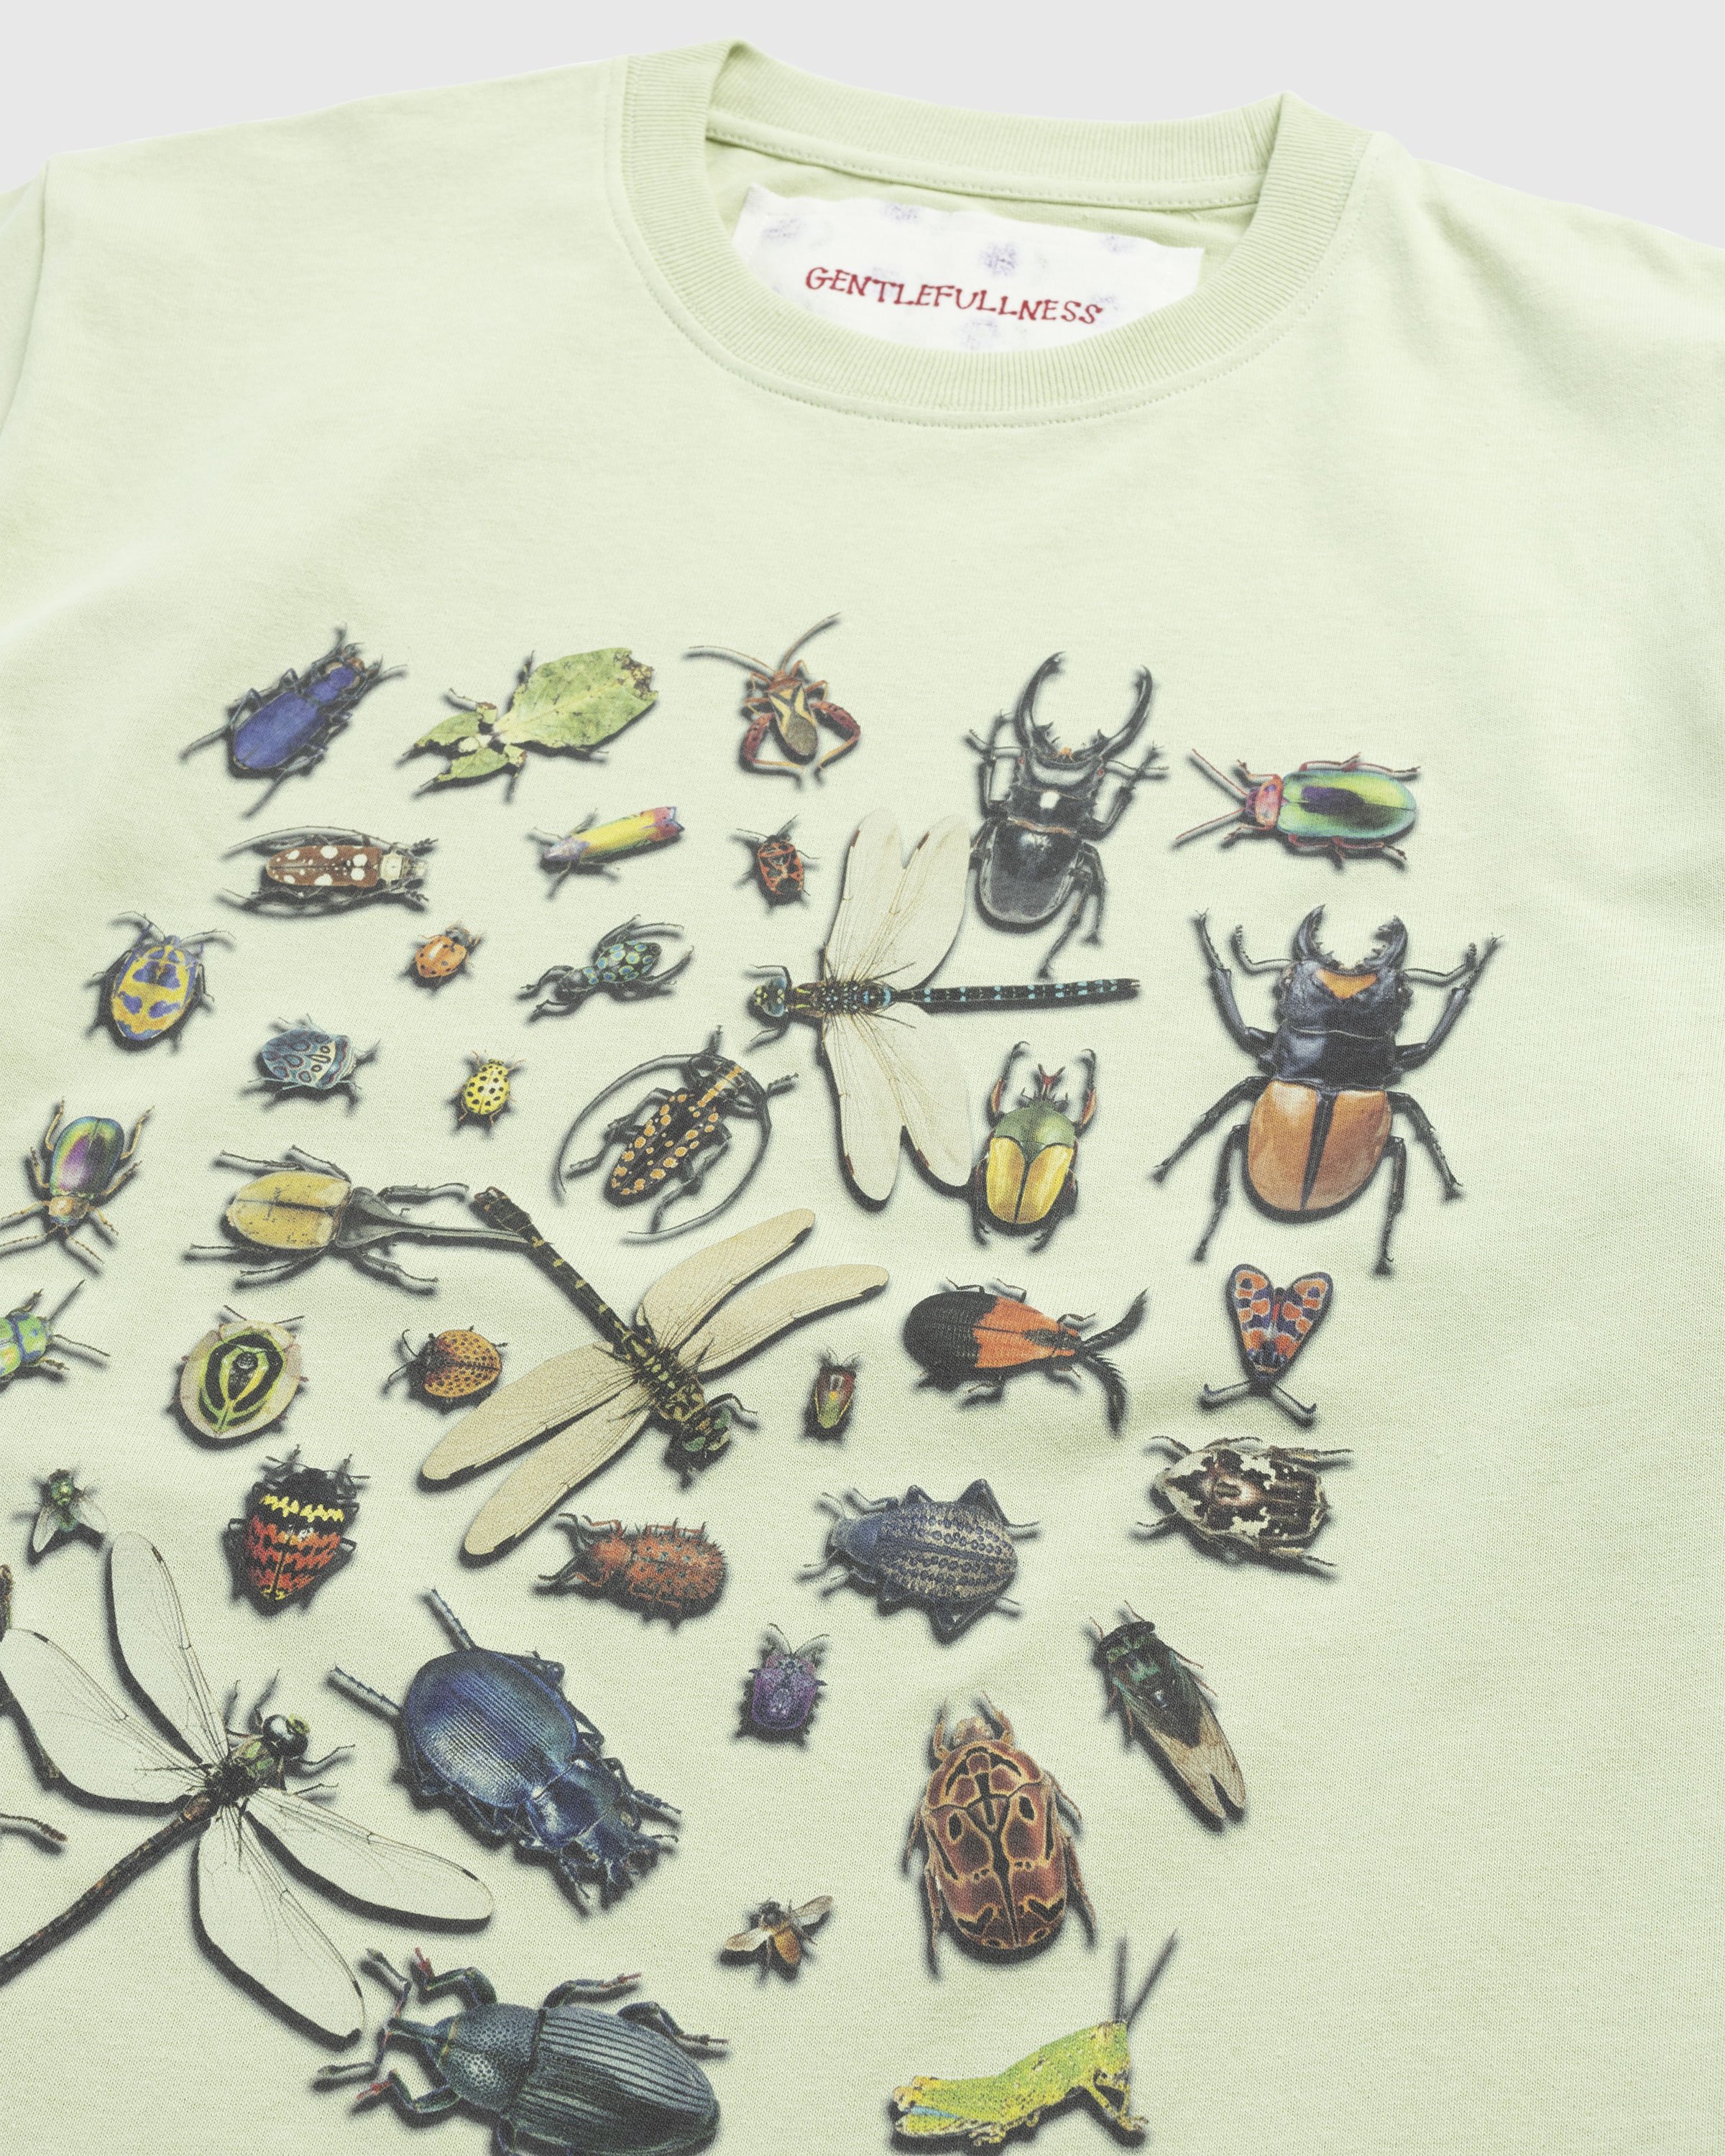 Gentle Fullness - Recycled Cotton Bugs Tee Green - Clothing - Green - Image 5